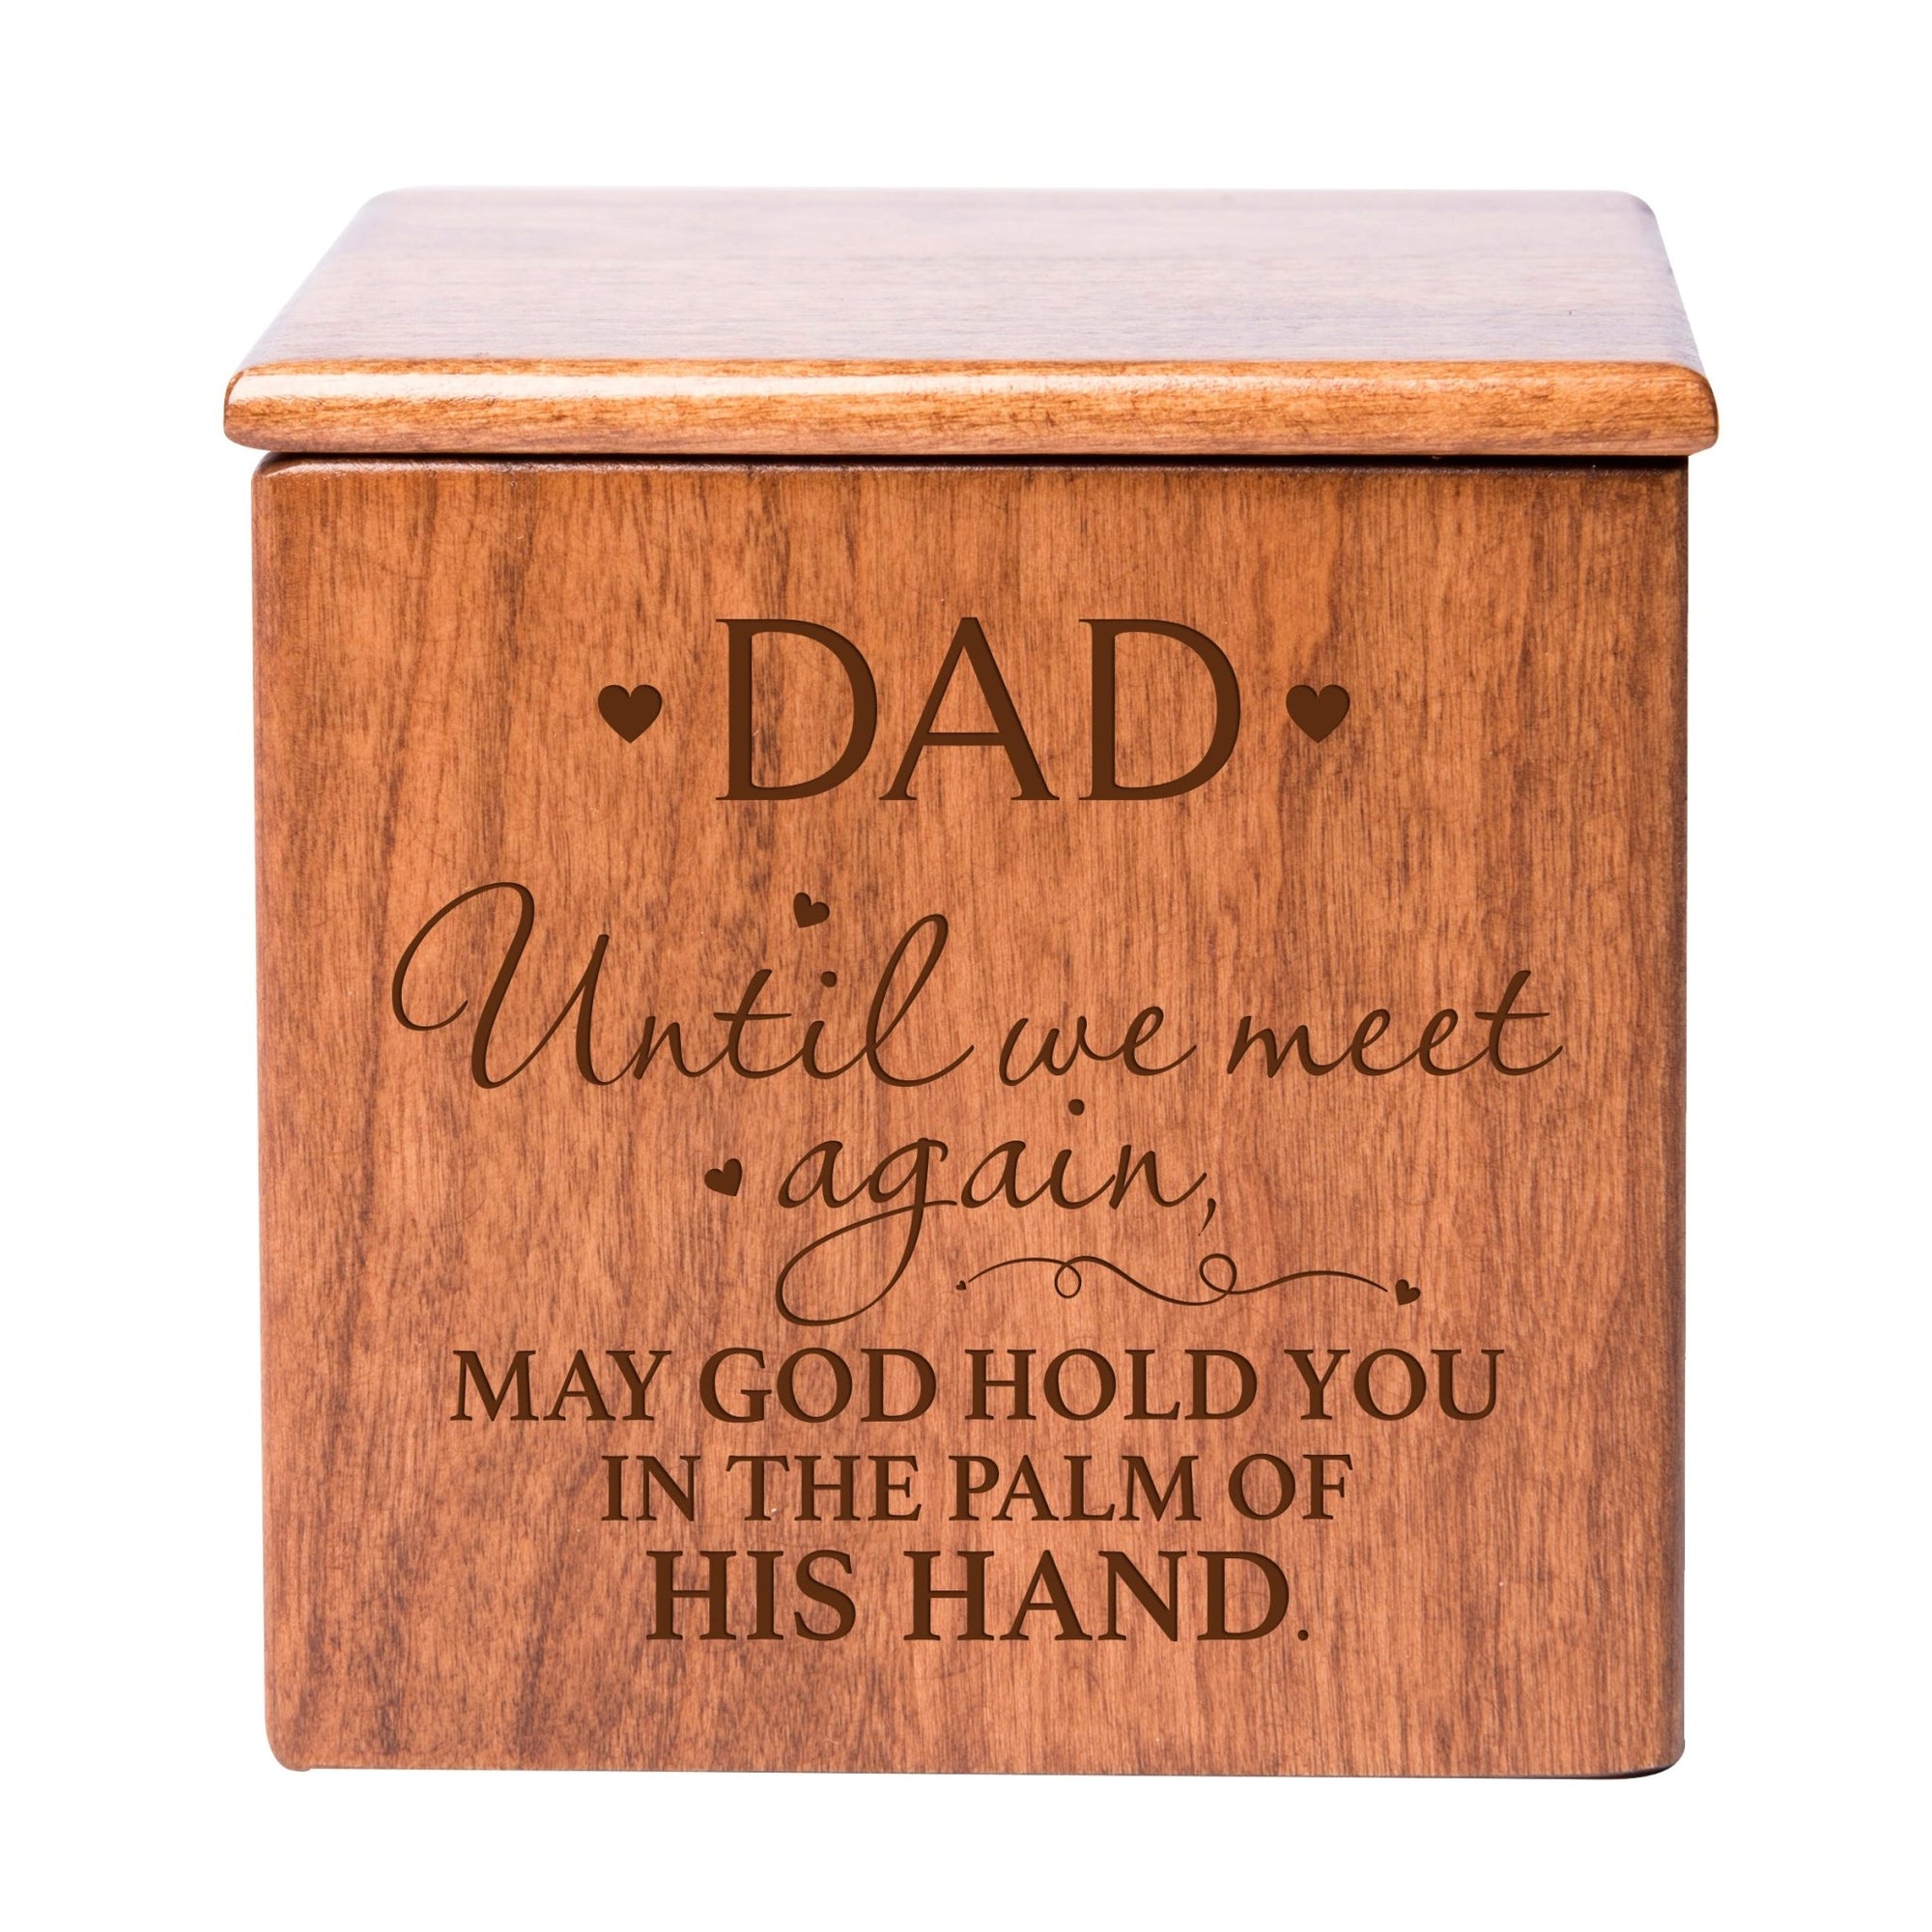 Dad Wooden Funeral Cremation Urn Keepsake Box for Human Ashes 49 cu in - LifeSong Milestones